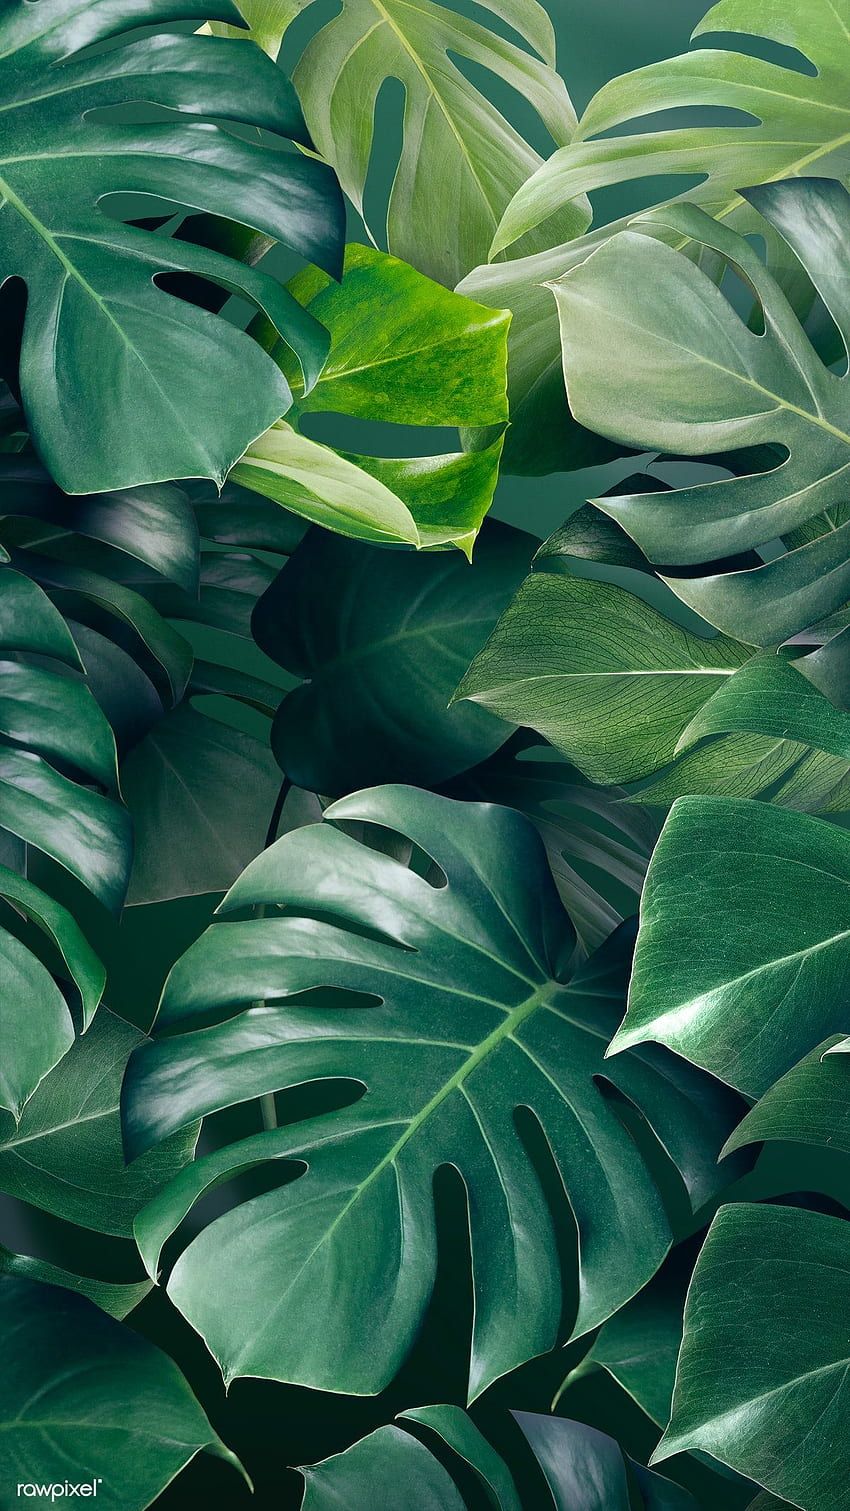 A close up of some green leaves - Leaves, Monstera